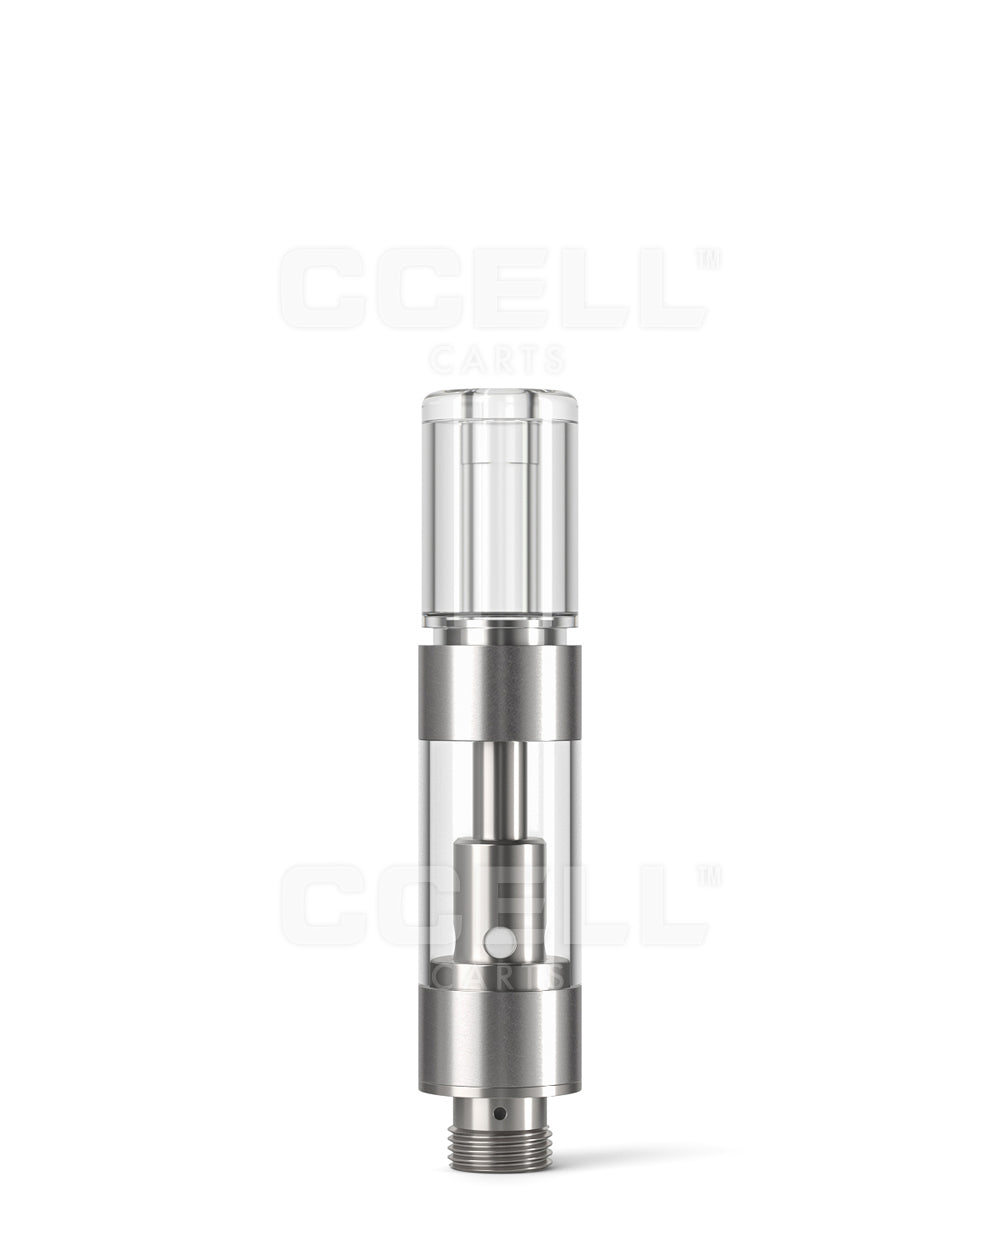 CCELL Plastic Cartridge - Round Mouthpiece 0.5ml - 100 Count